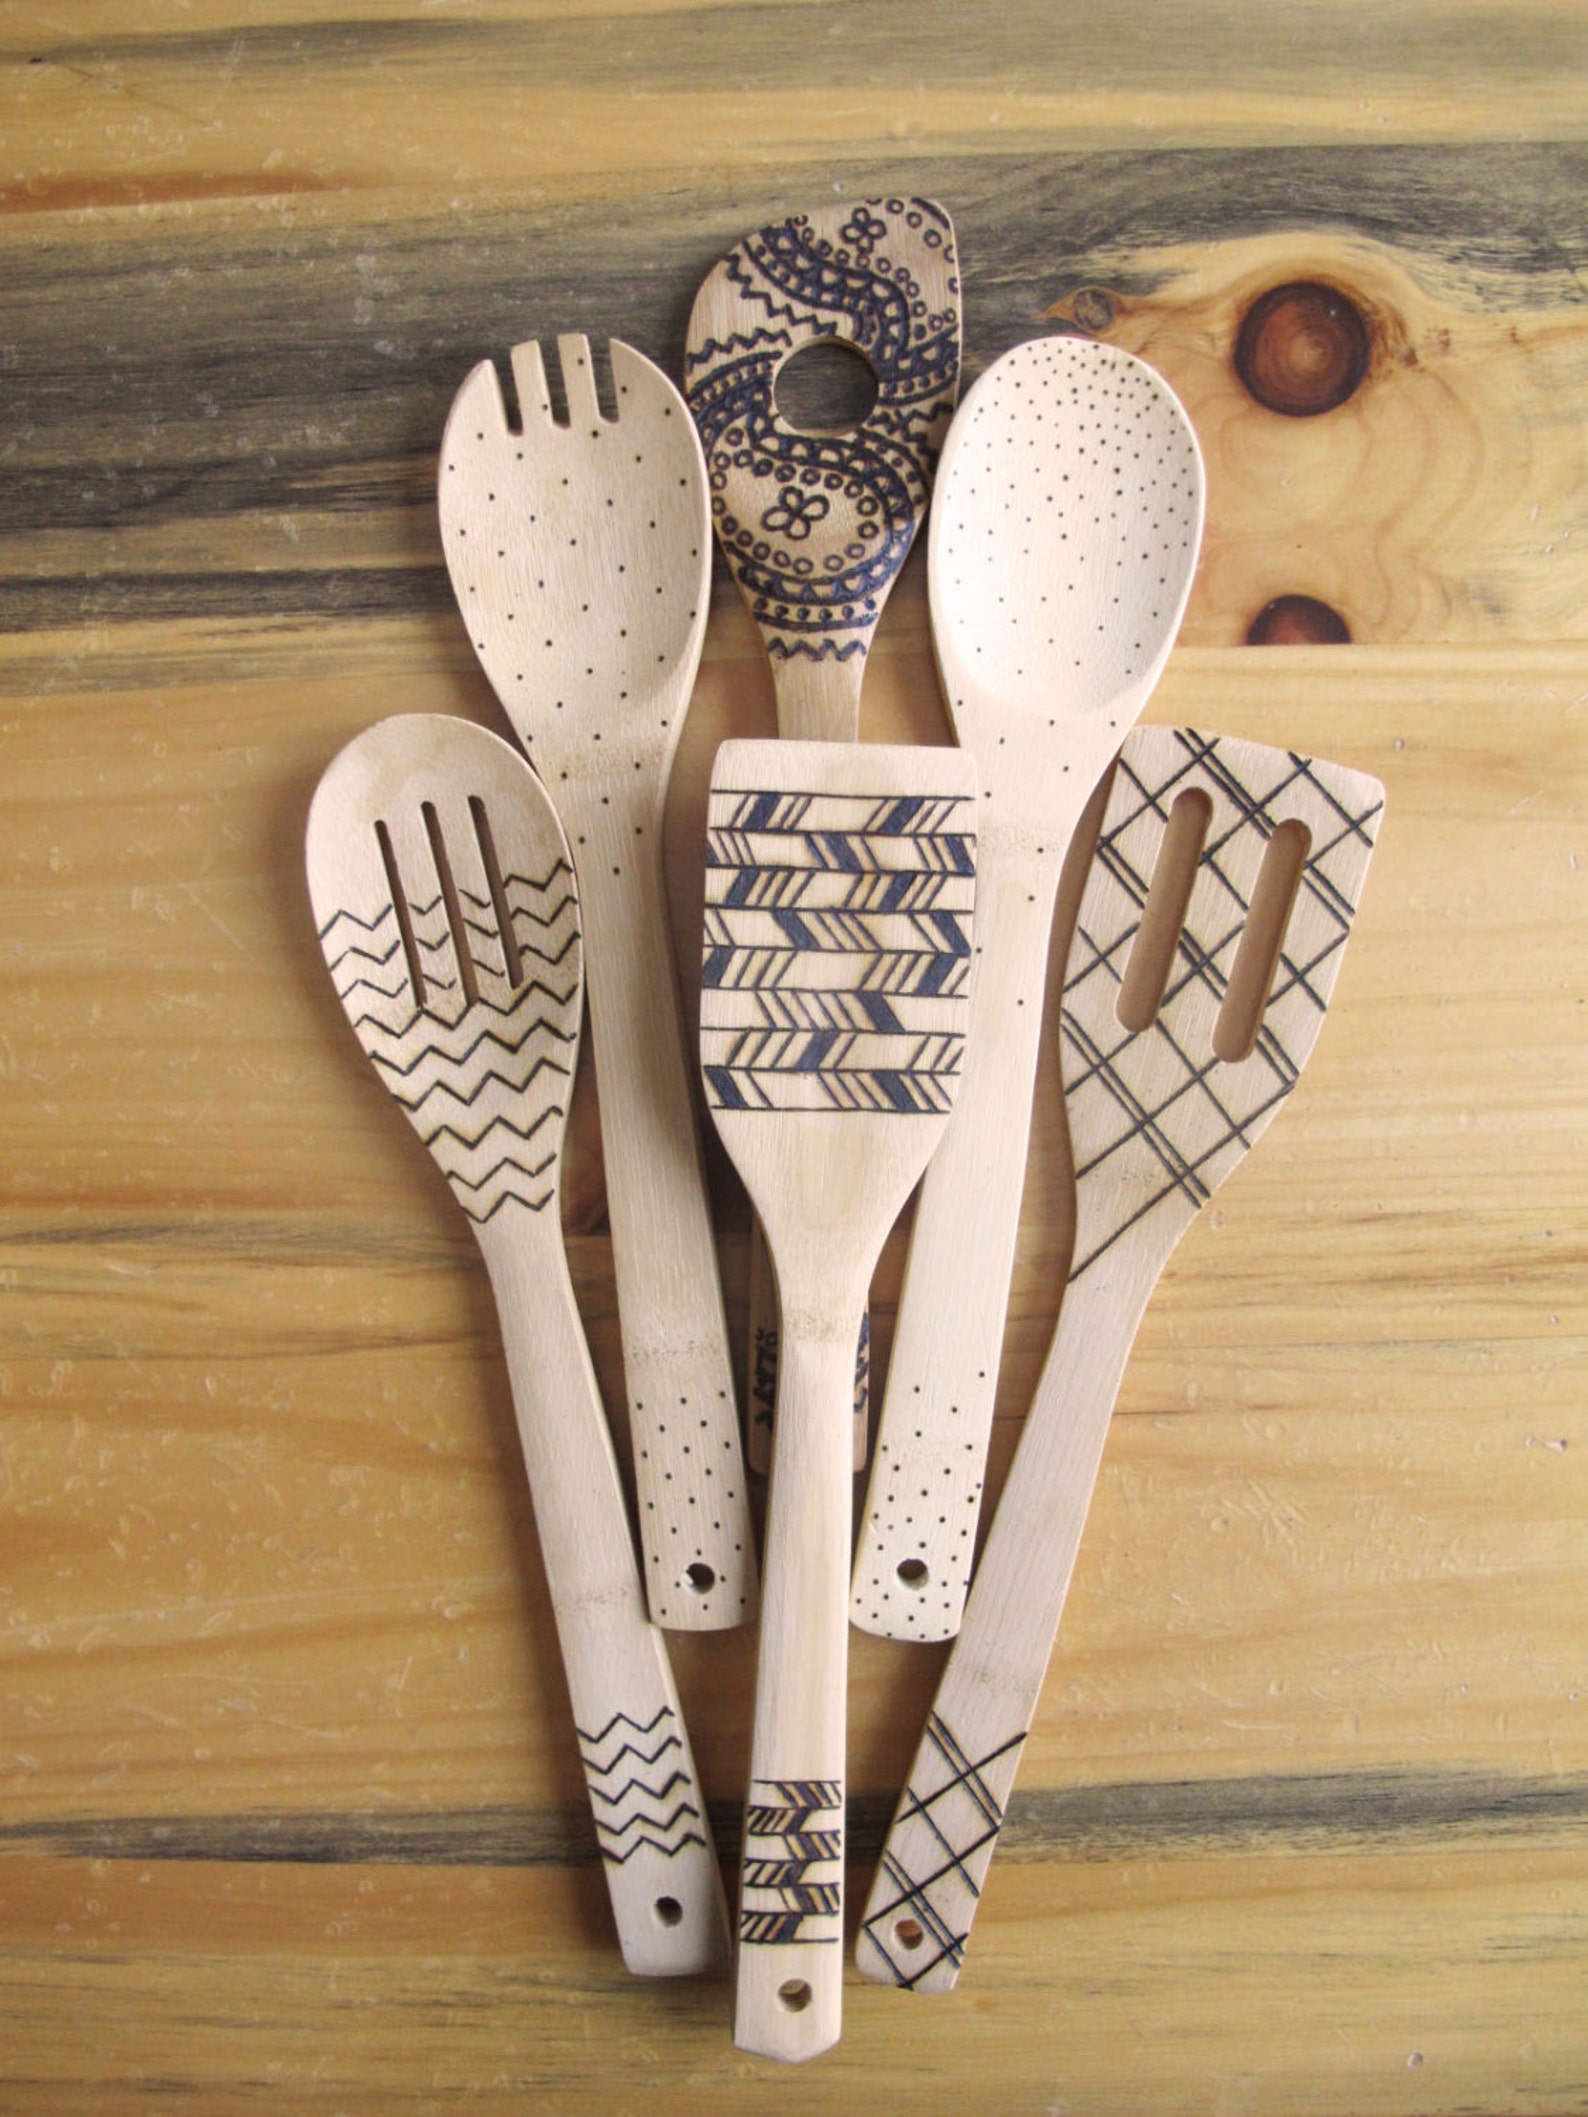 Wood burned kitchen utensils bamboo wooden spoons Etsy